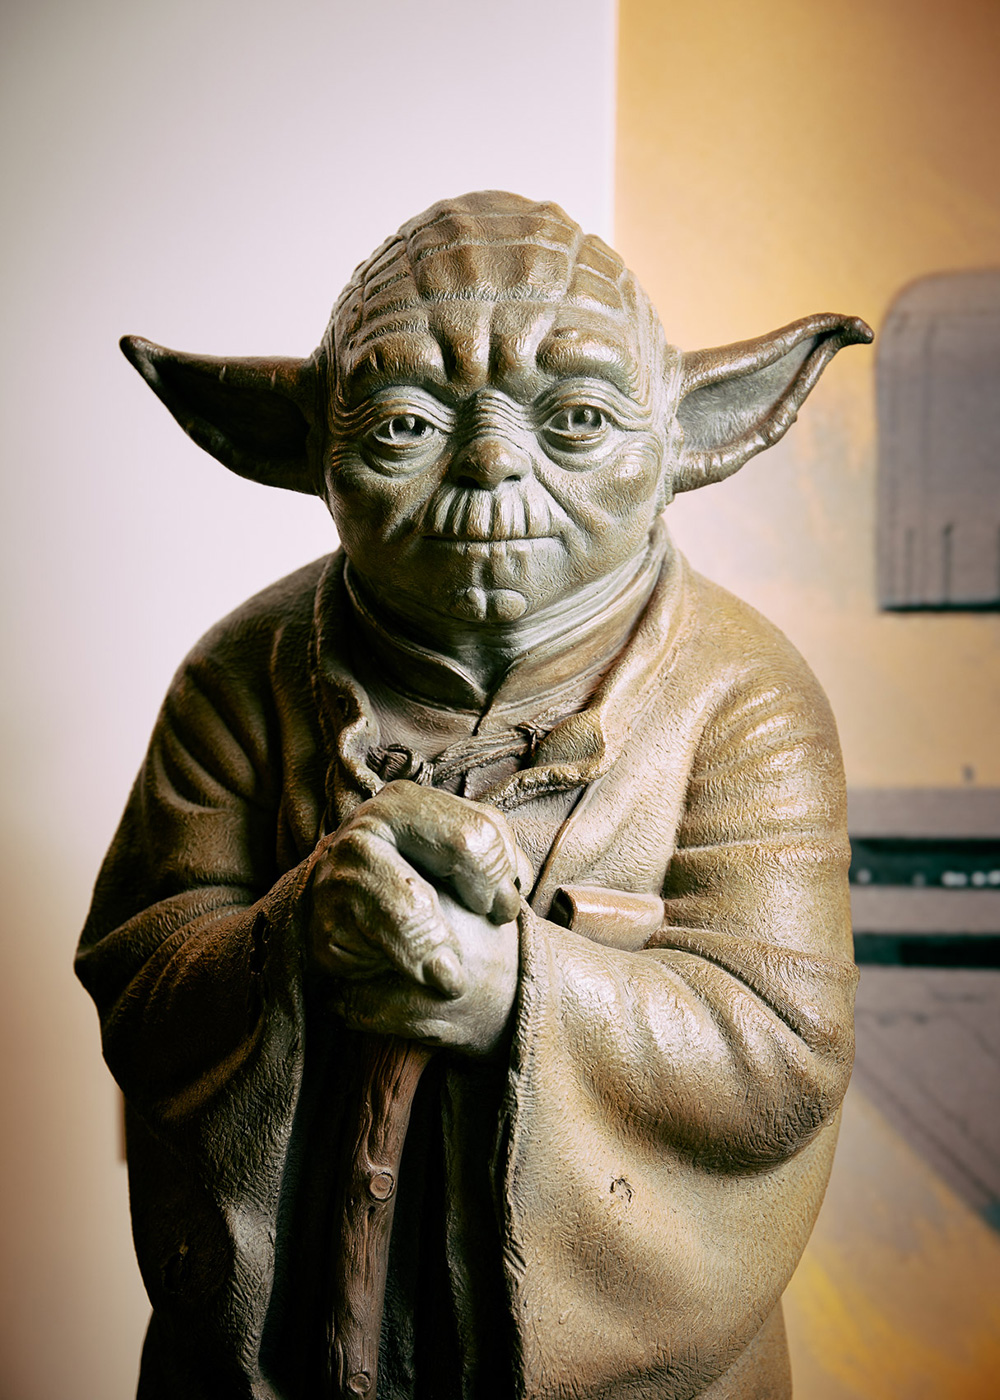 Yoda statue at Lucasfilm